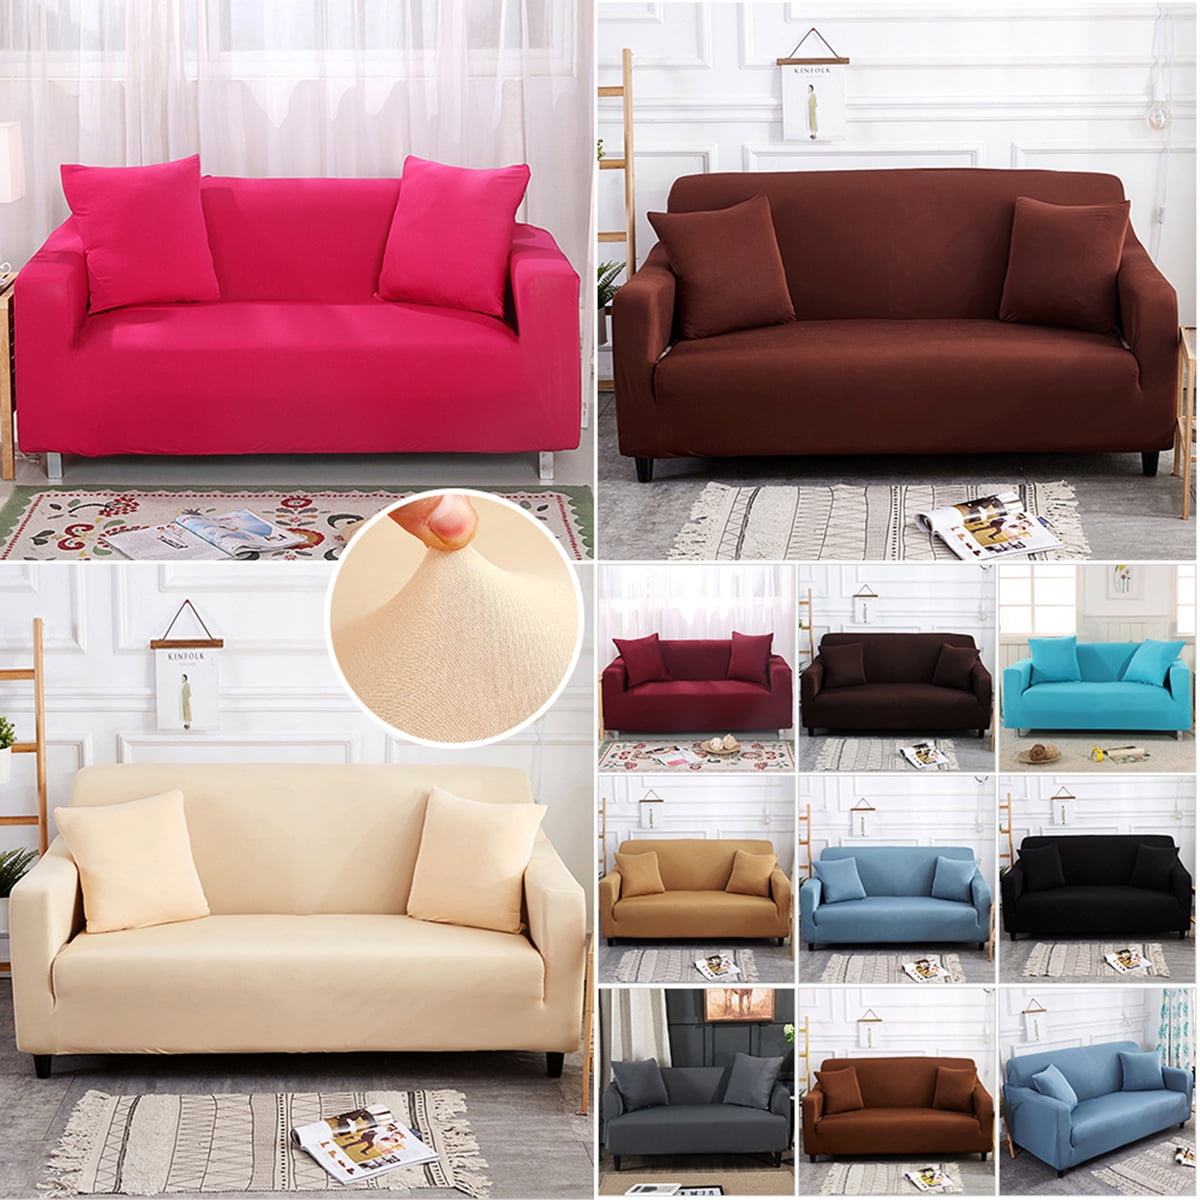 Sofa Covers Washable Stretch Fabric Sectional Couch Cover Slipcover 1-4 Seater 